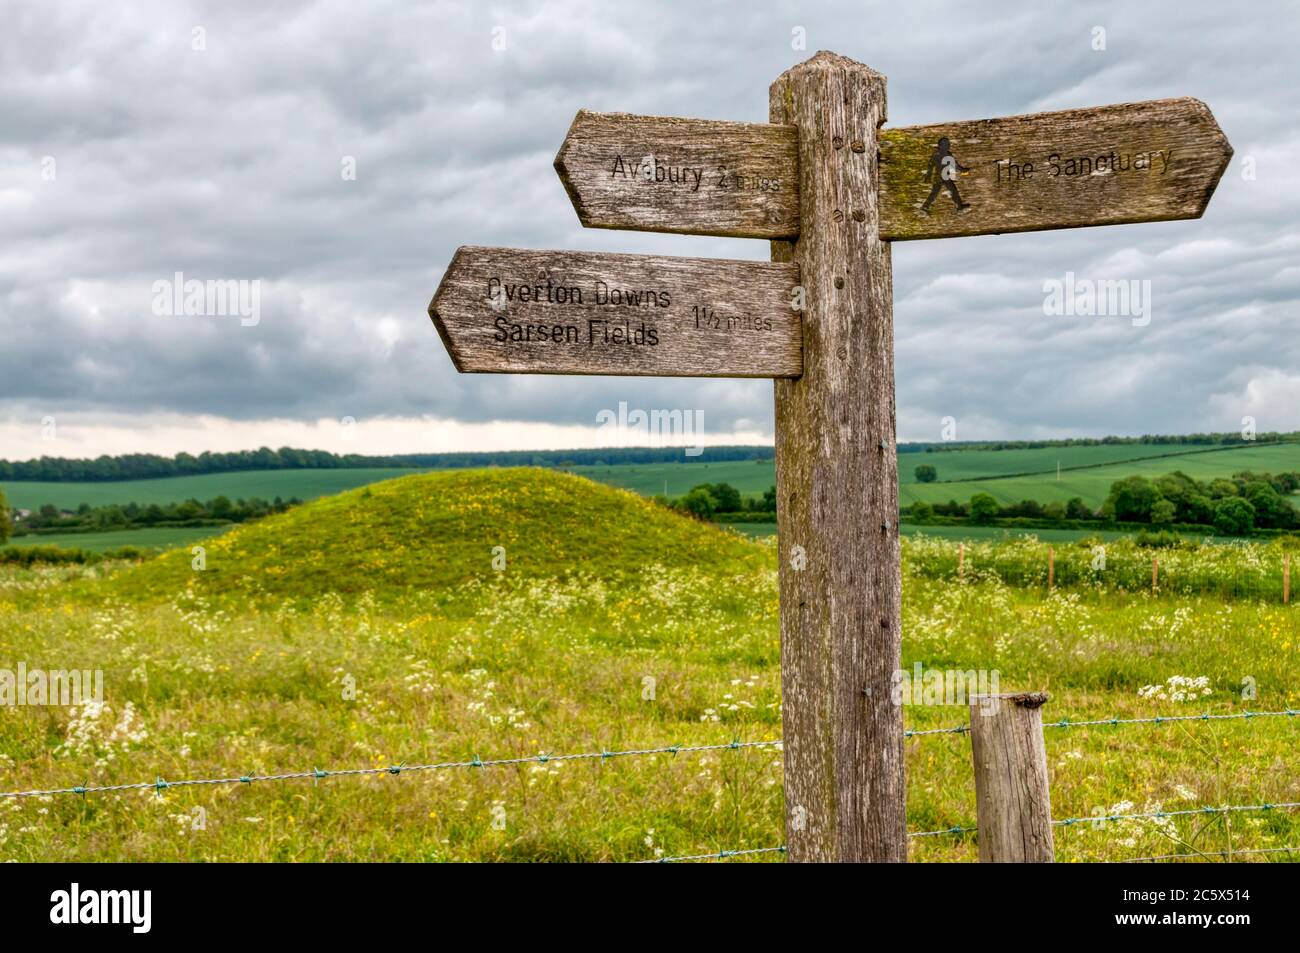 A signpost beside a tumulus on the Ridgeway points directions to local historic features Avebury, Overton Downs, Sarsen Fields and The Sanctuary. Stock Photo